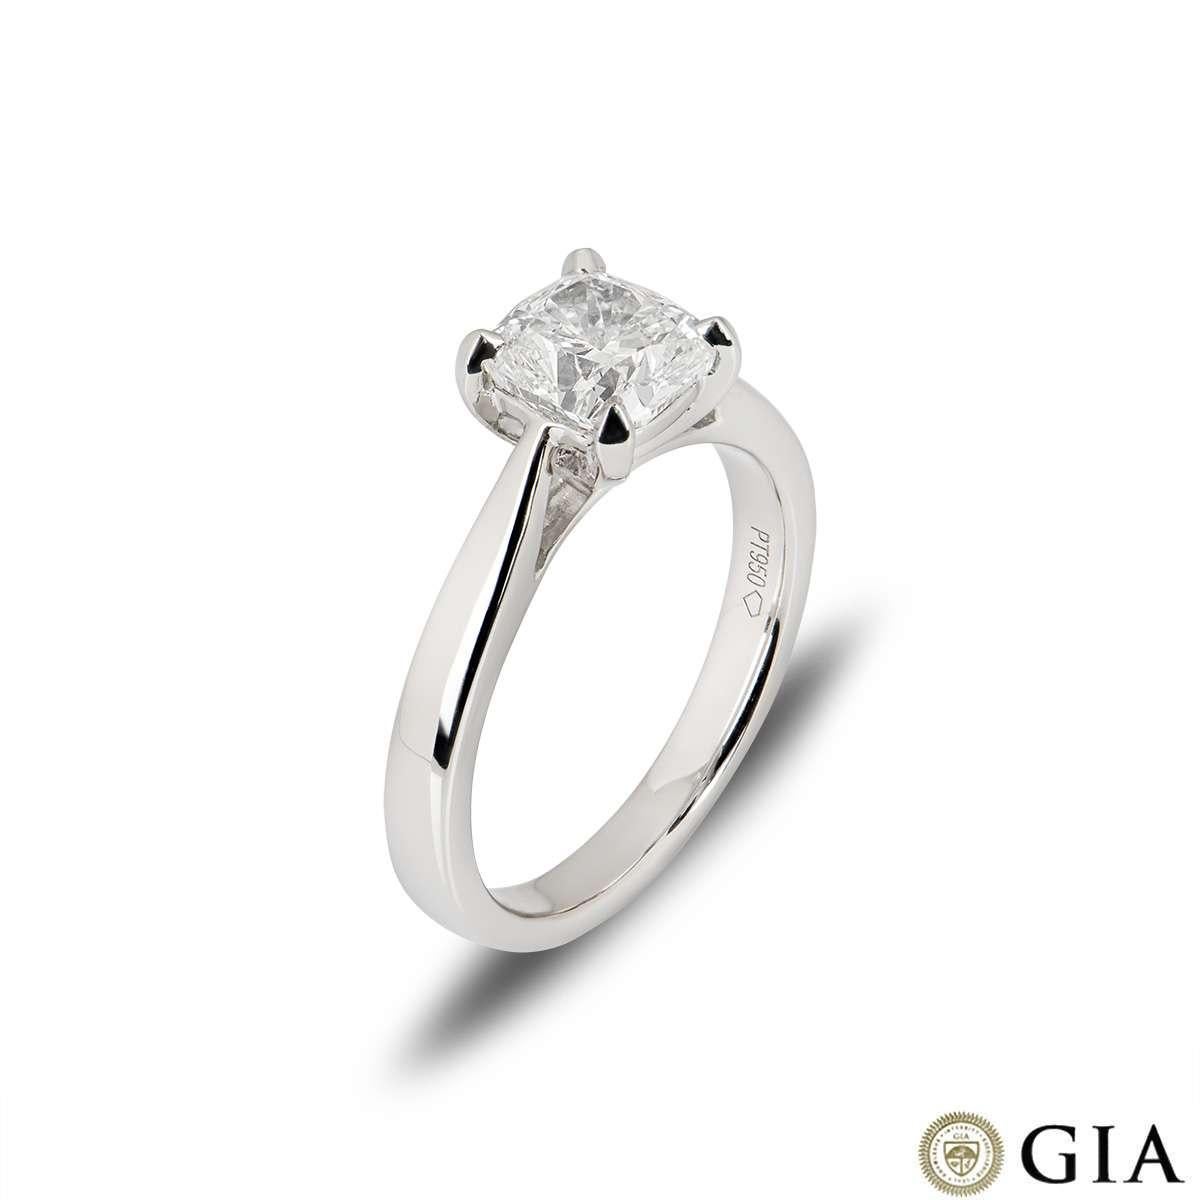 A stunning platinum cushion cut diamond engagement ring. The ring comprises of a cushion cut diamond in a four claw setting with a weight of 1.51ct, H colour and VS1 clarity. The ring is currently a size UK M / EU 52 / US 6 but can be adjusted for a